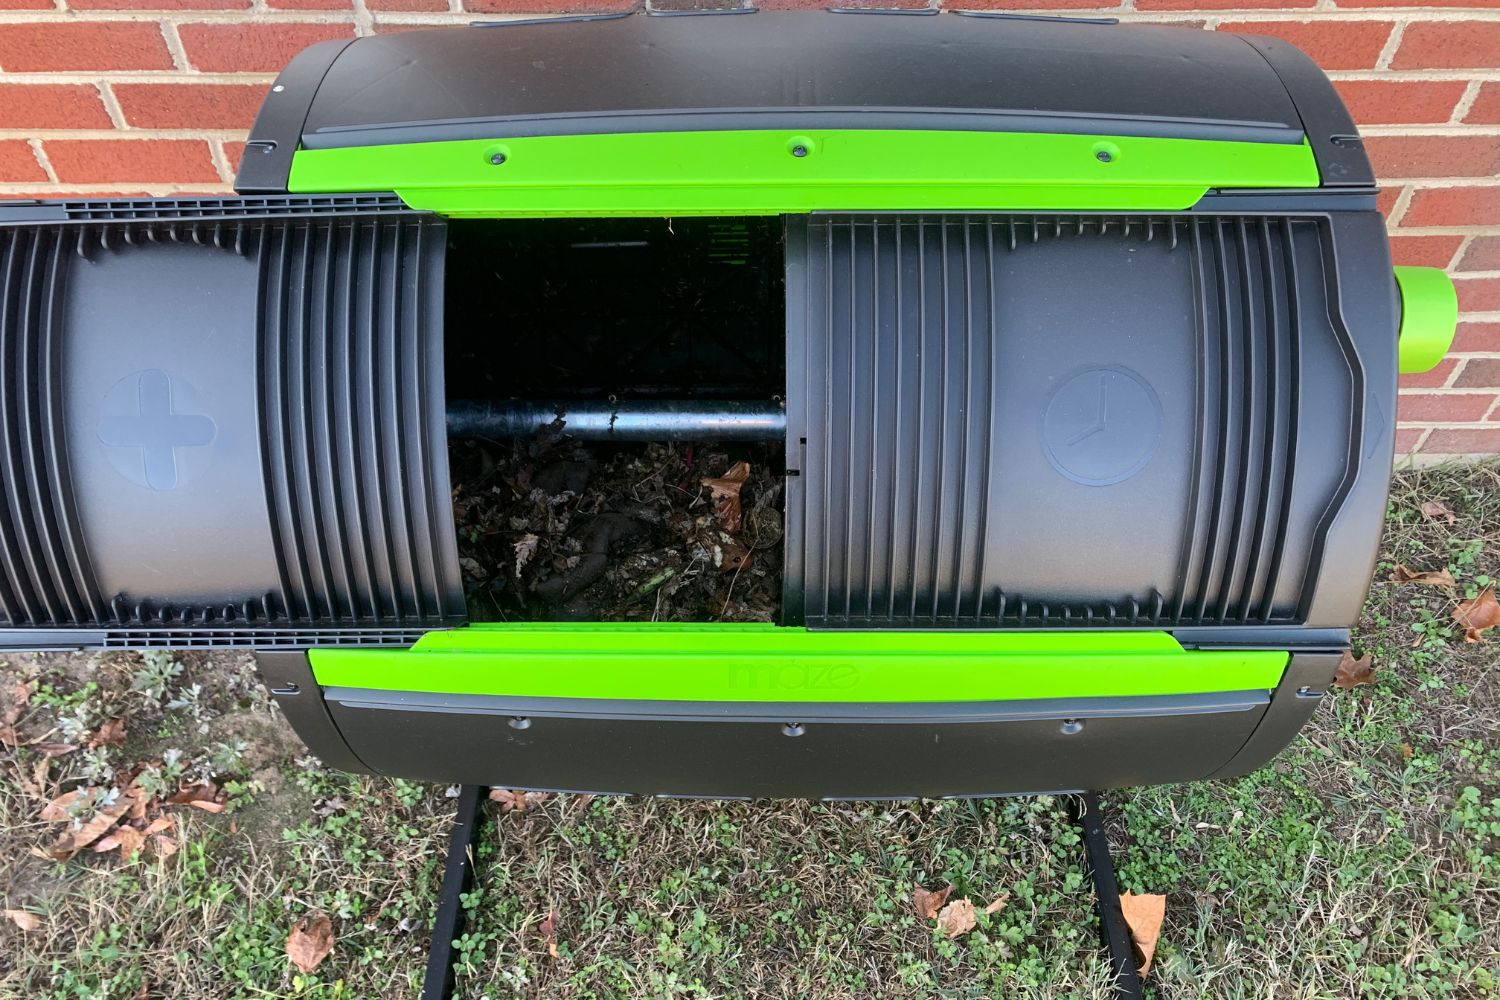 The best compost tumbler option from above with its door open to reveal composting materials